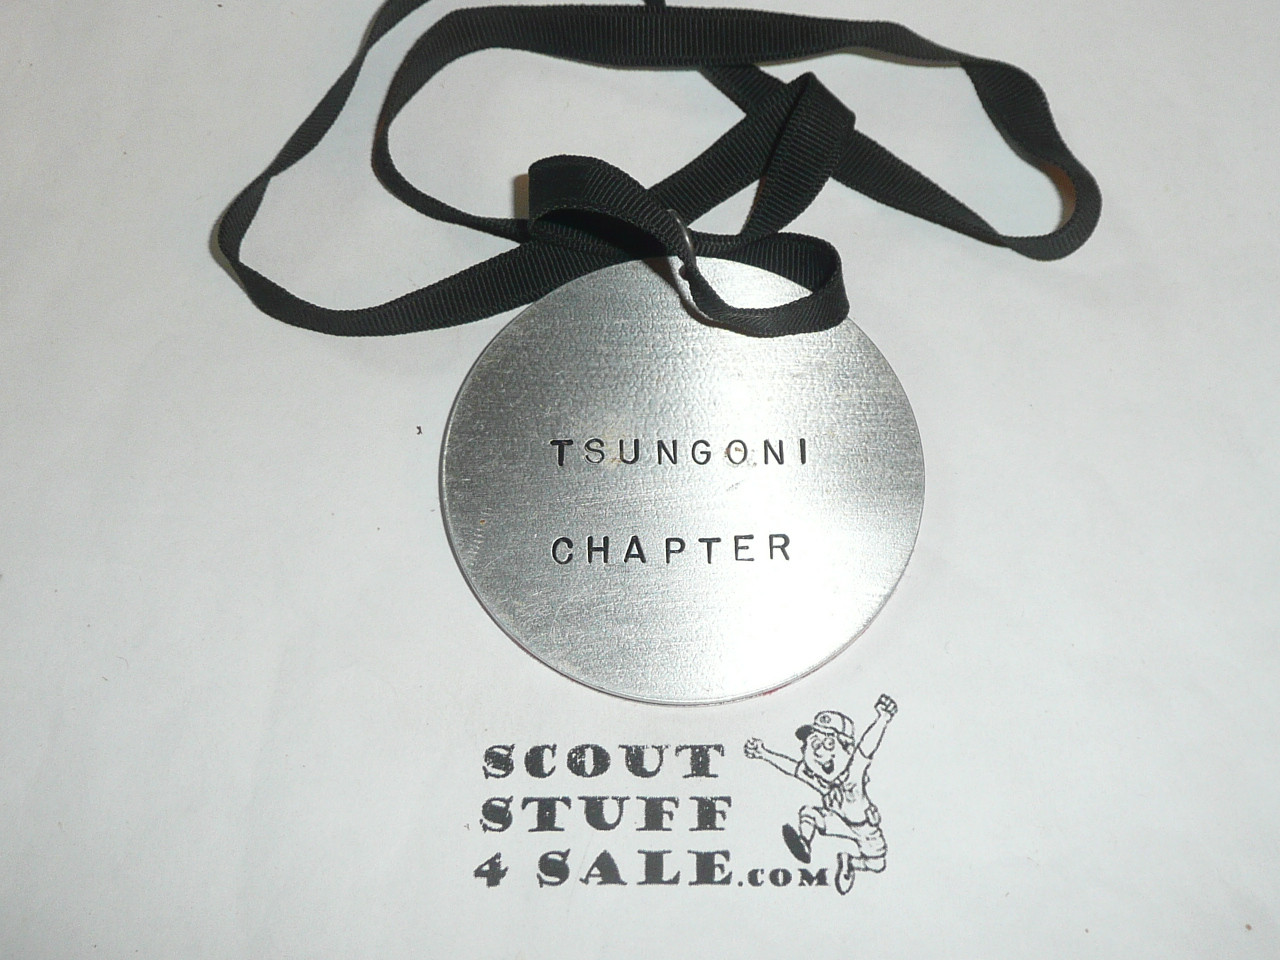 Order of the Arrow Lodge #566 Malibu, Tsungoni Chapter Medicine Man Medallion, made by Bill Stroh